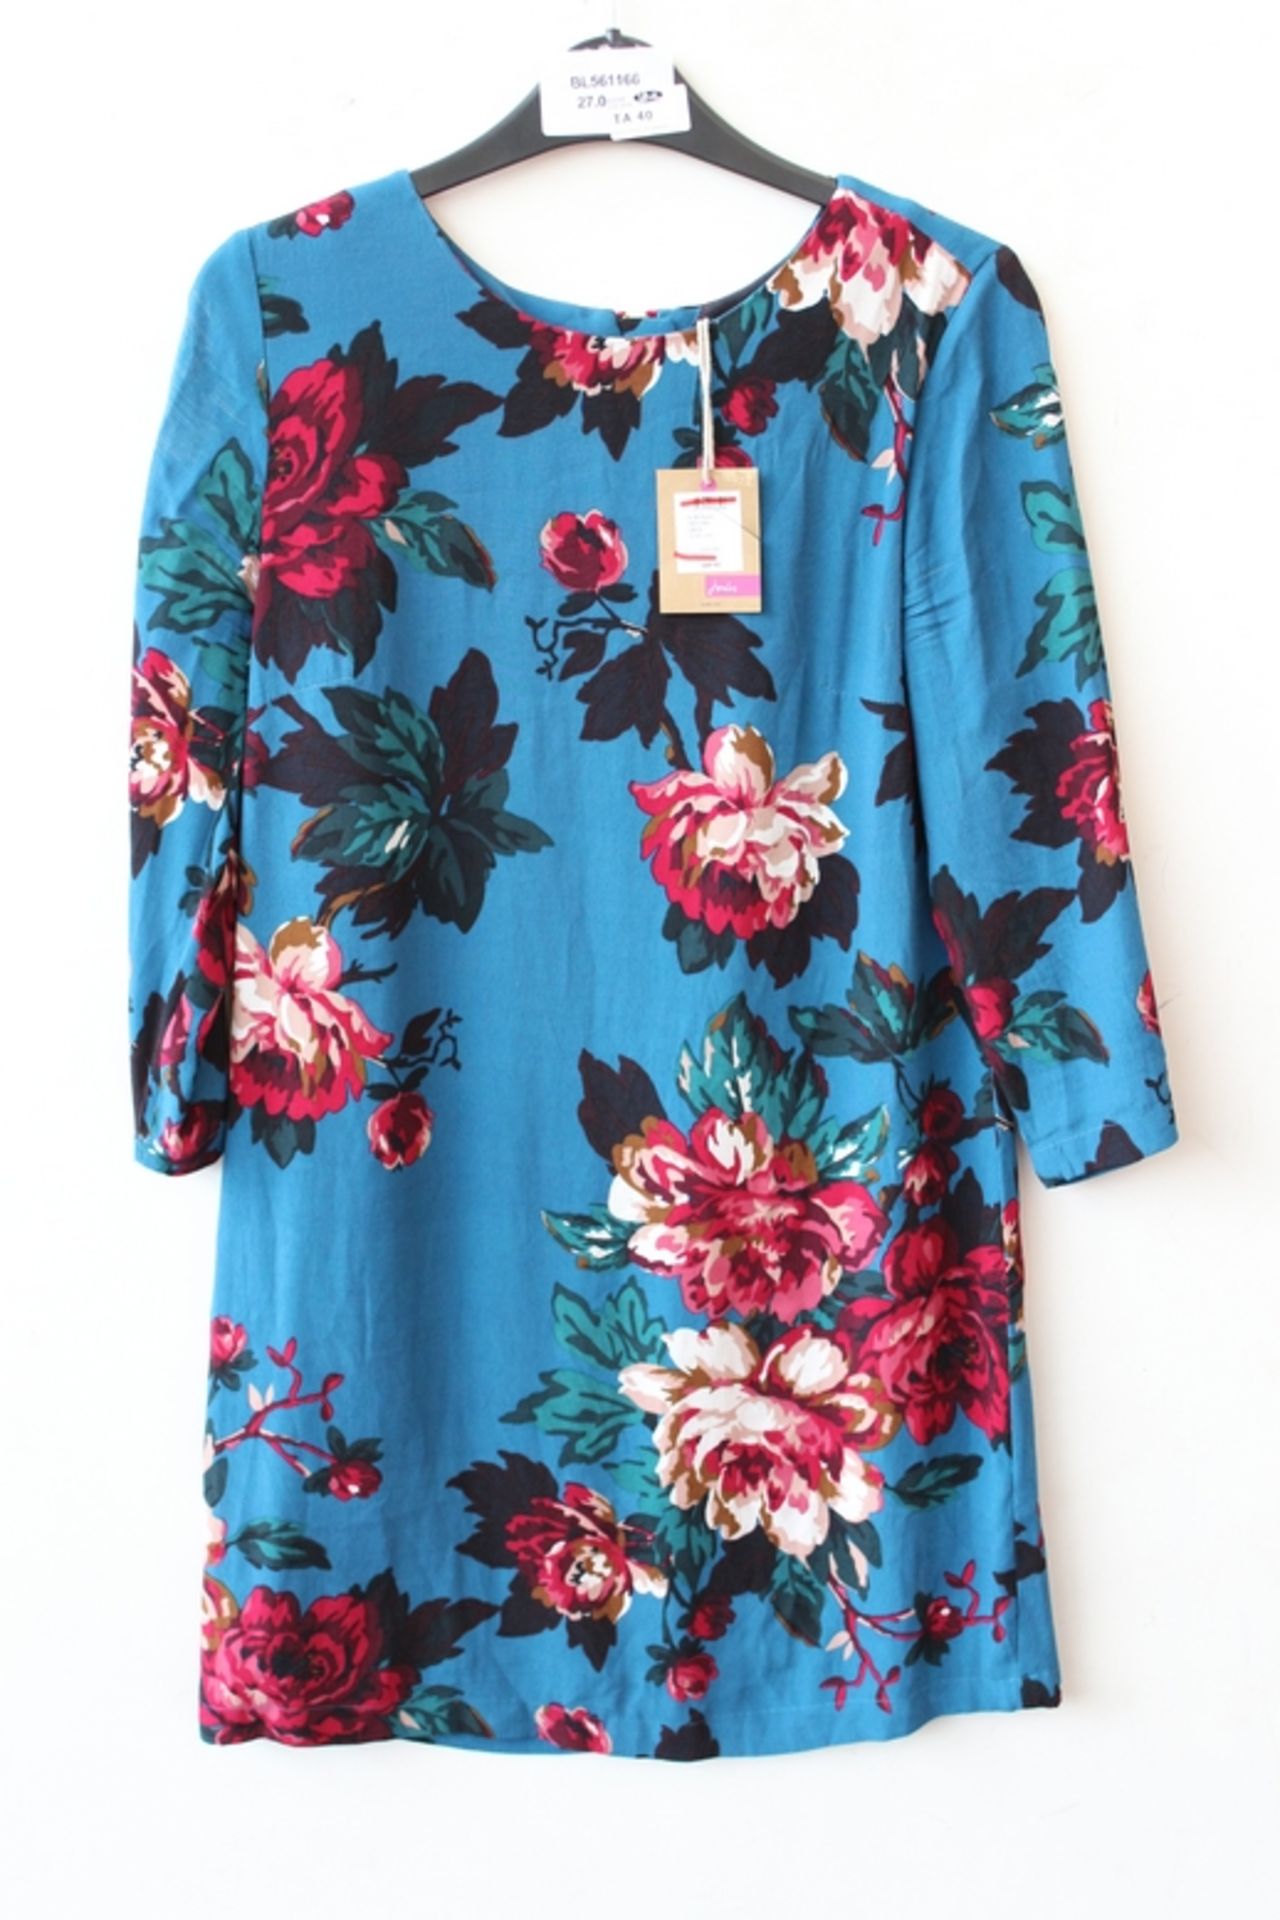 ONE JOULES LADIES DRESS SIZE 8 RRP £69.95 (BL561166)